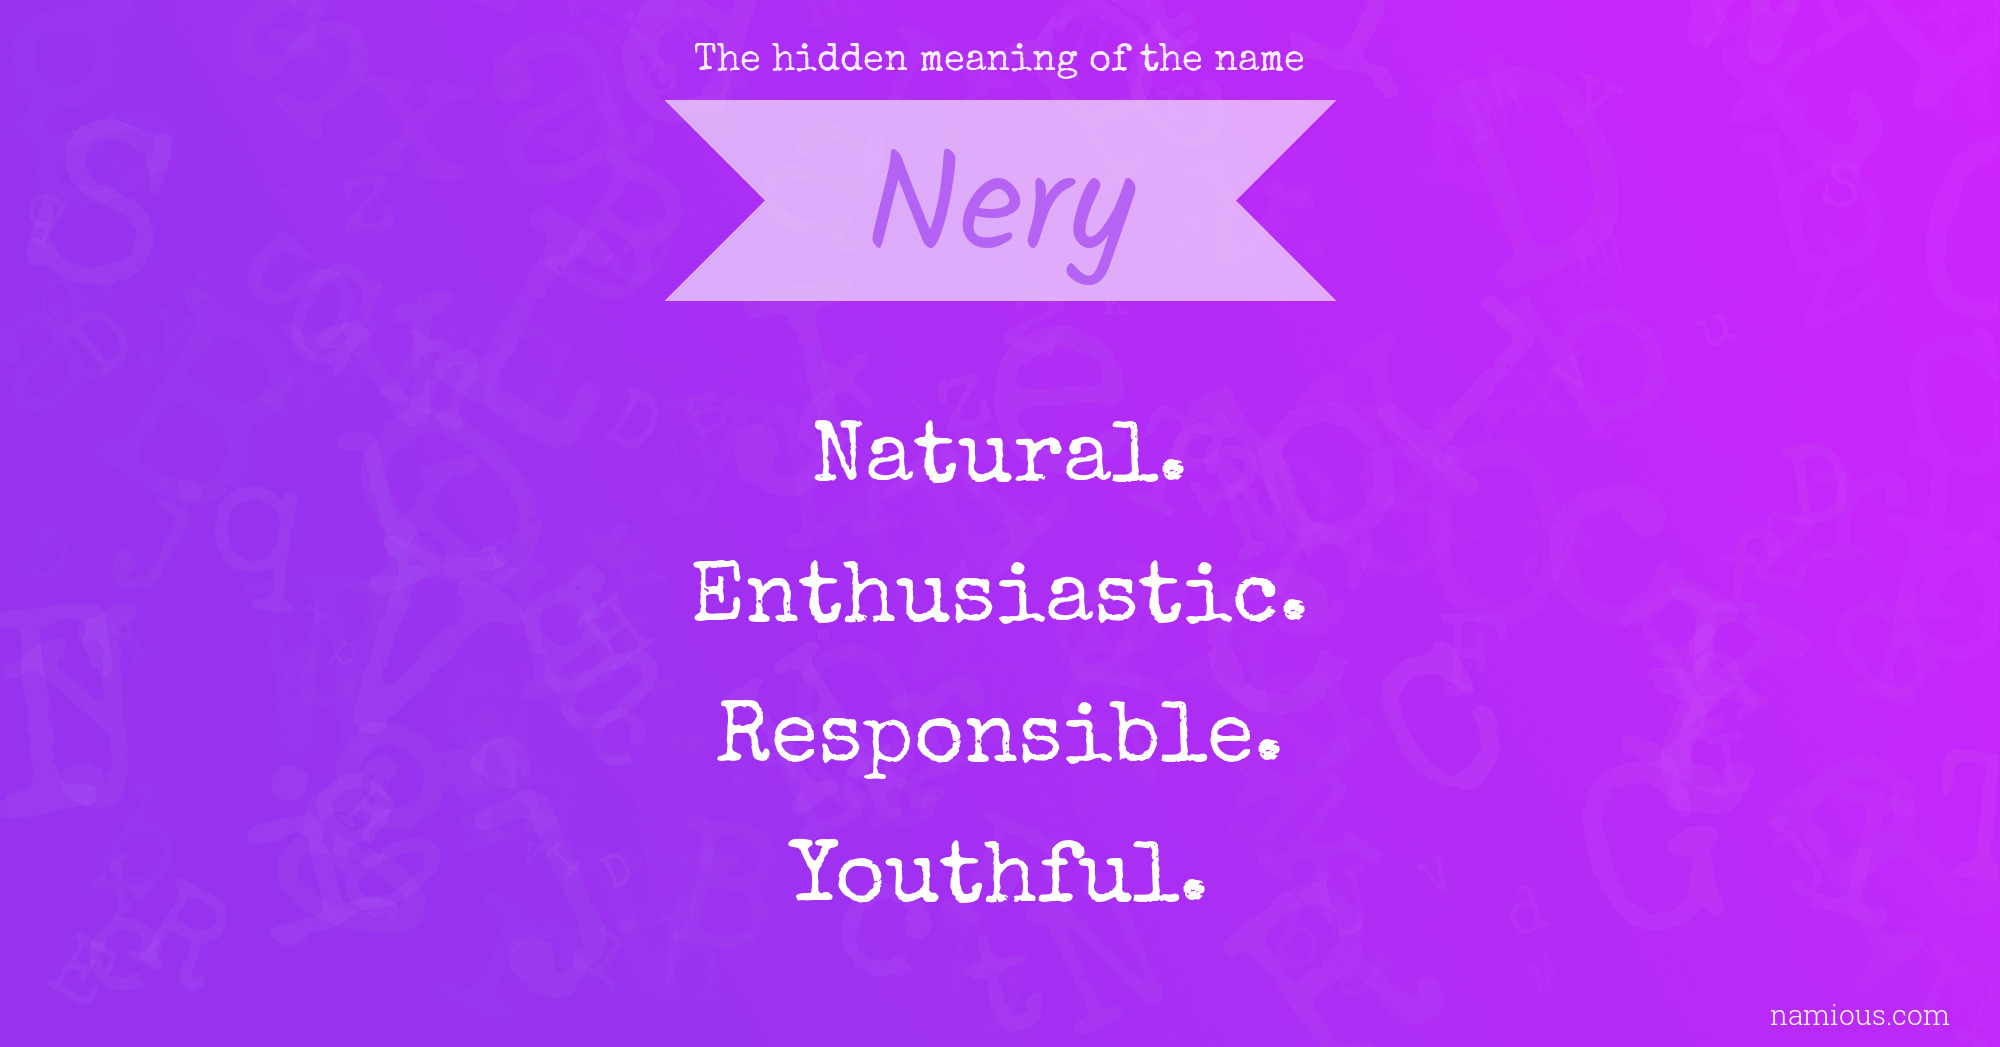 The hidden meaning of the name Nery